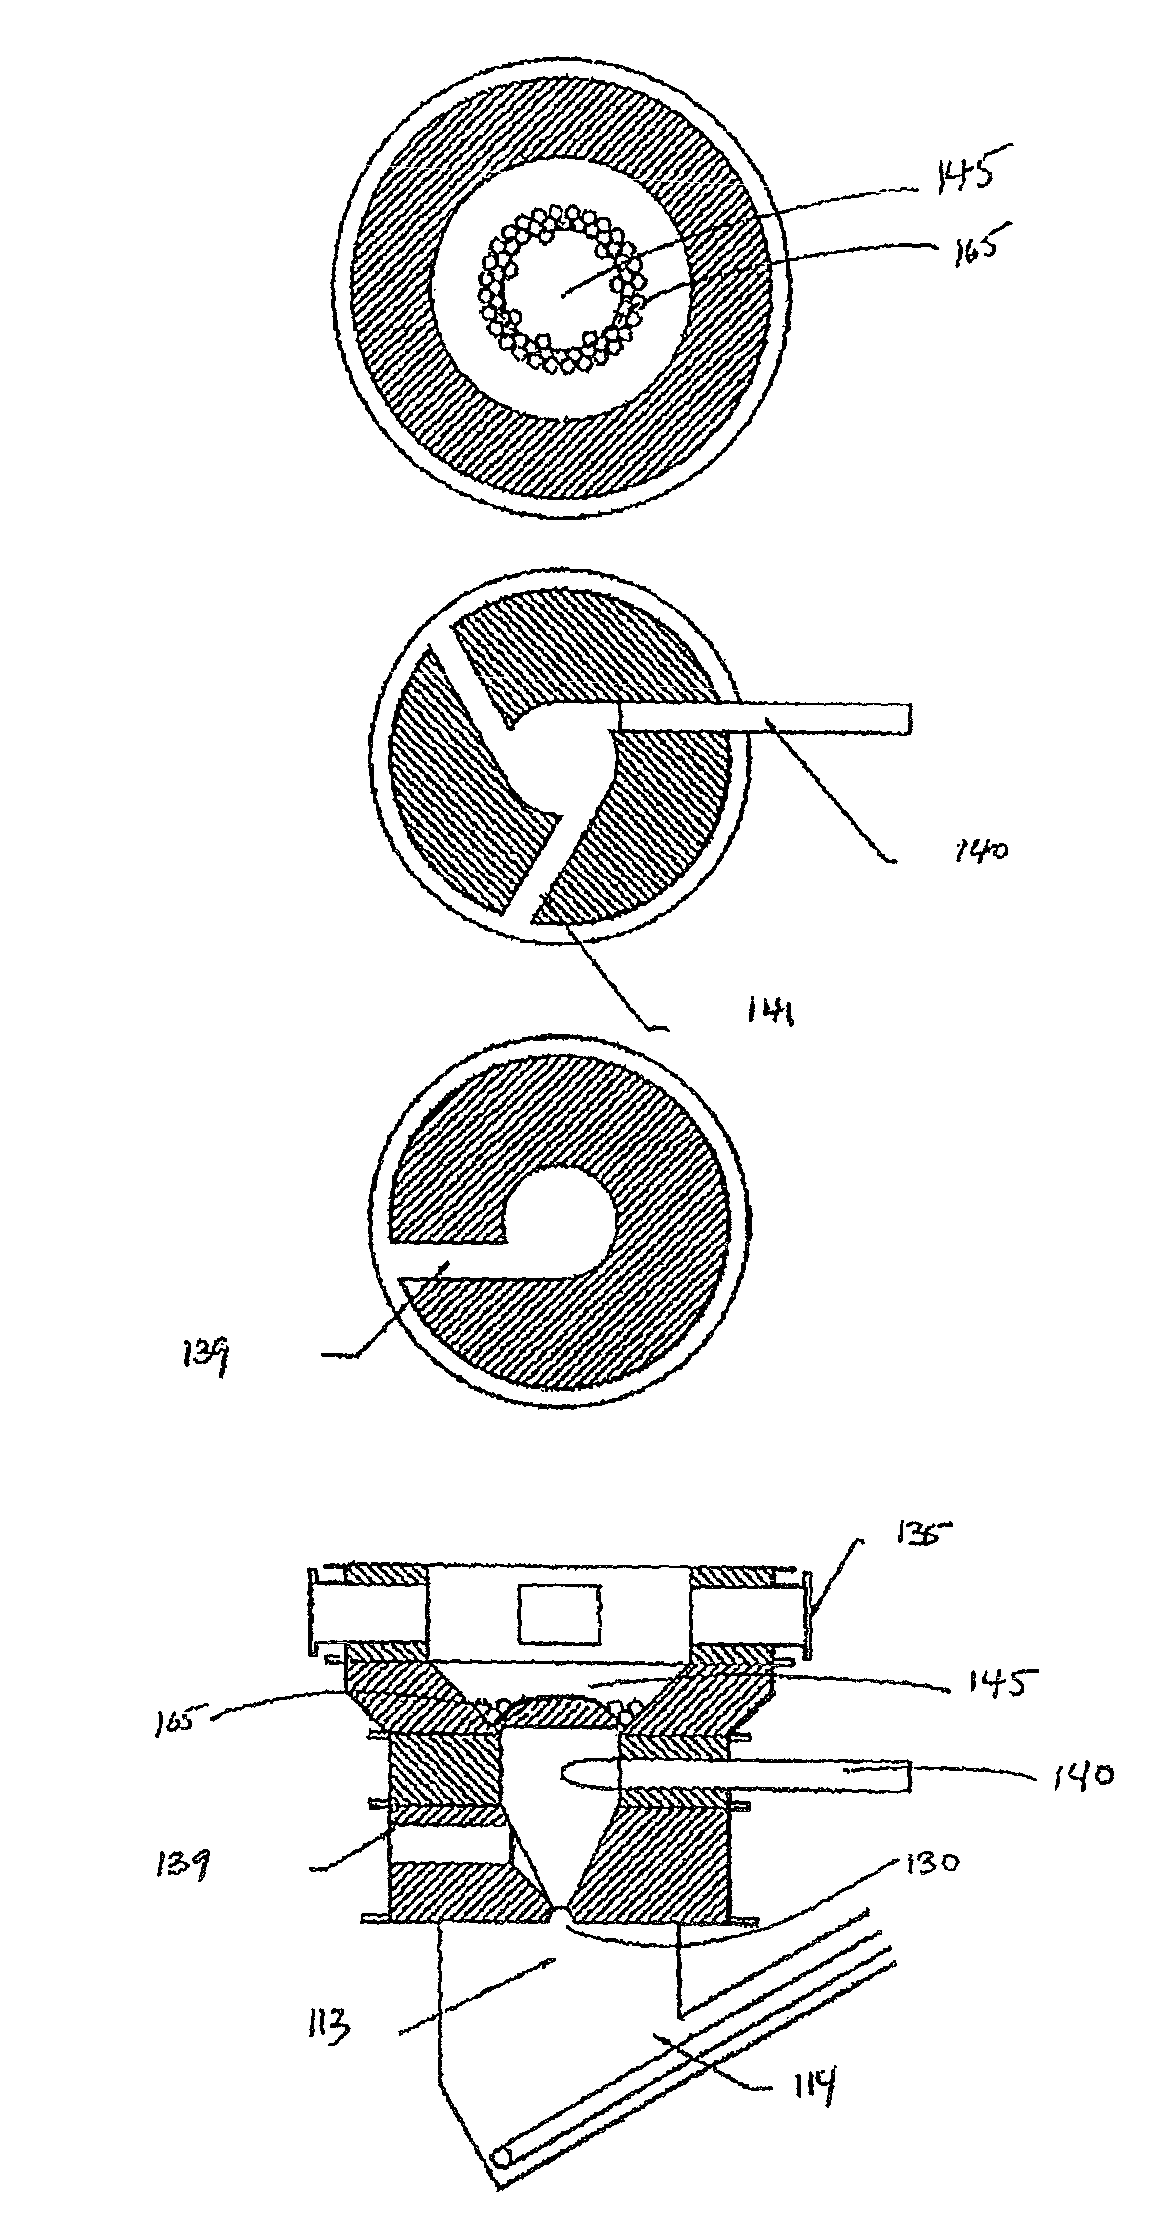 Gasification system with processed feedstock/char conversion and gas reformulation